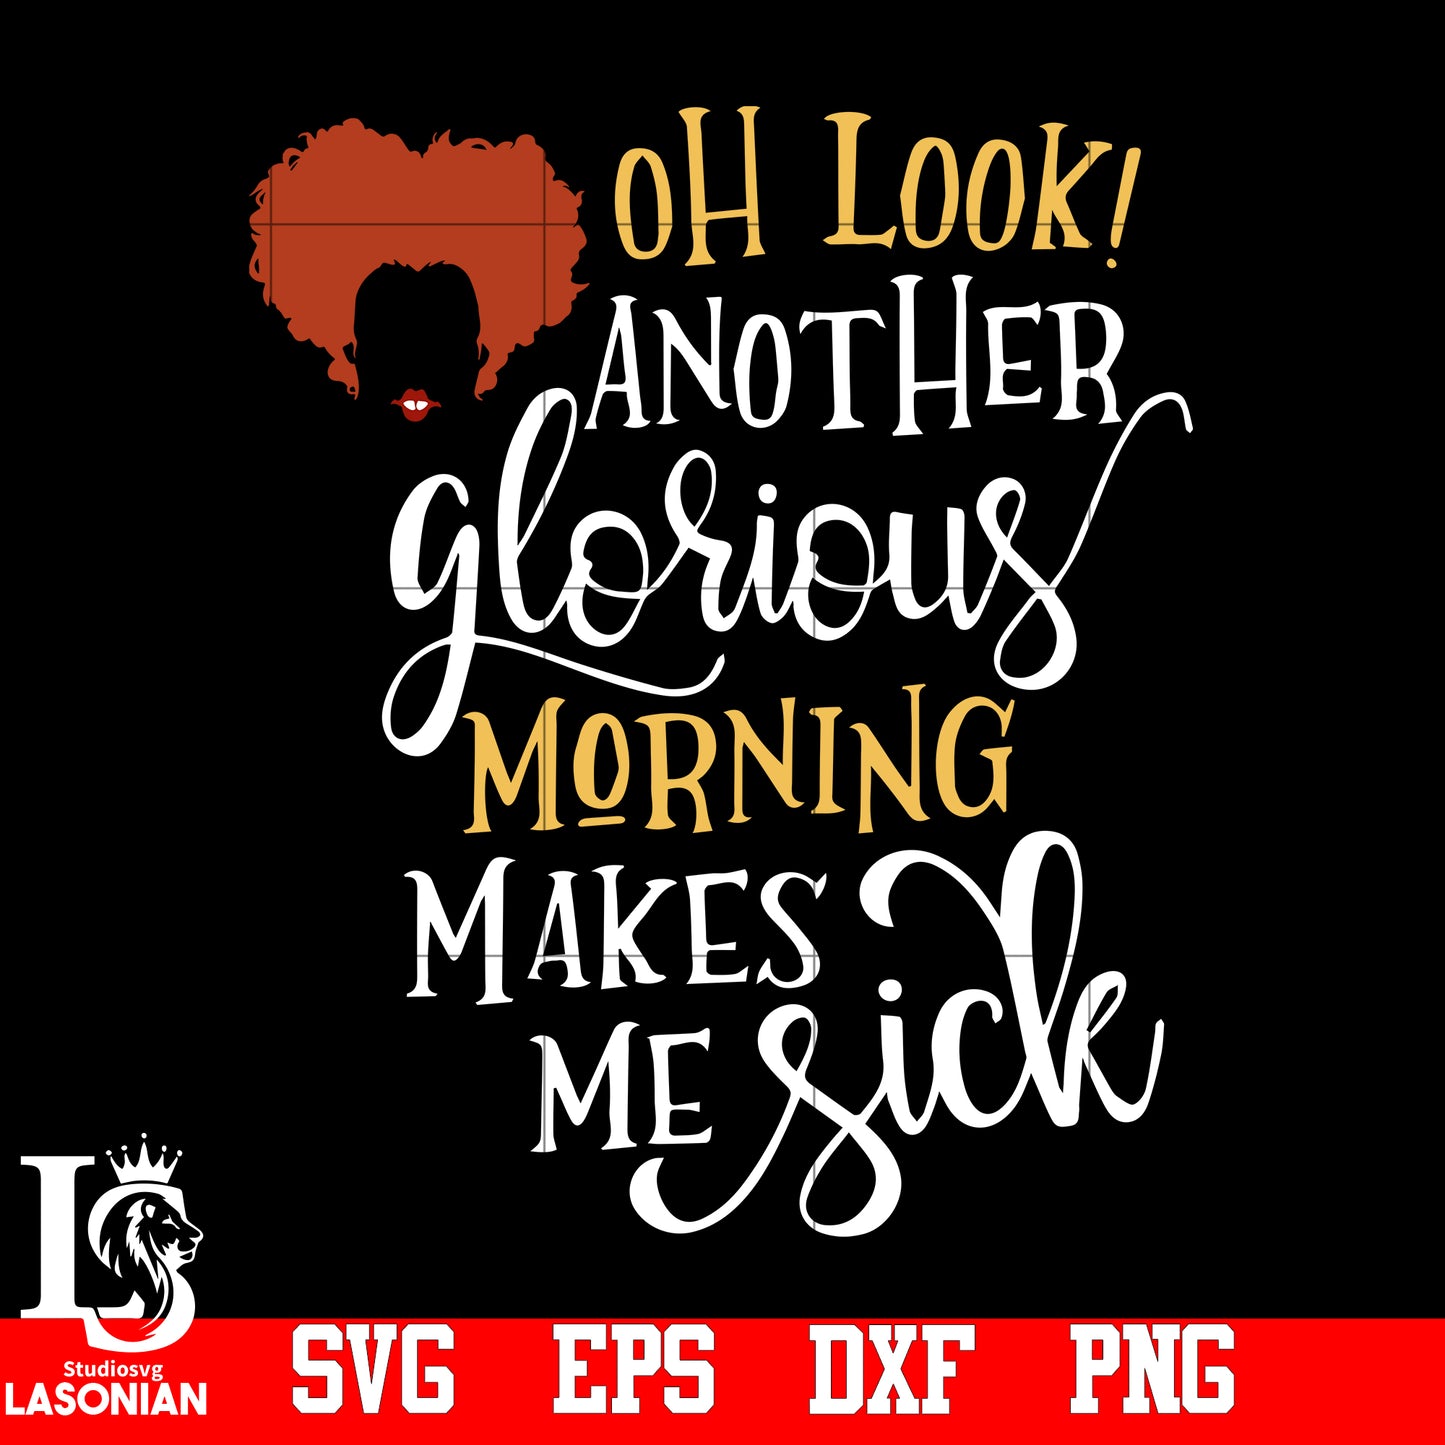 OH  Look Another Glorious Morning Makes Me sick svg,eps,dxf,png file